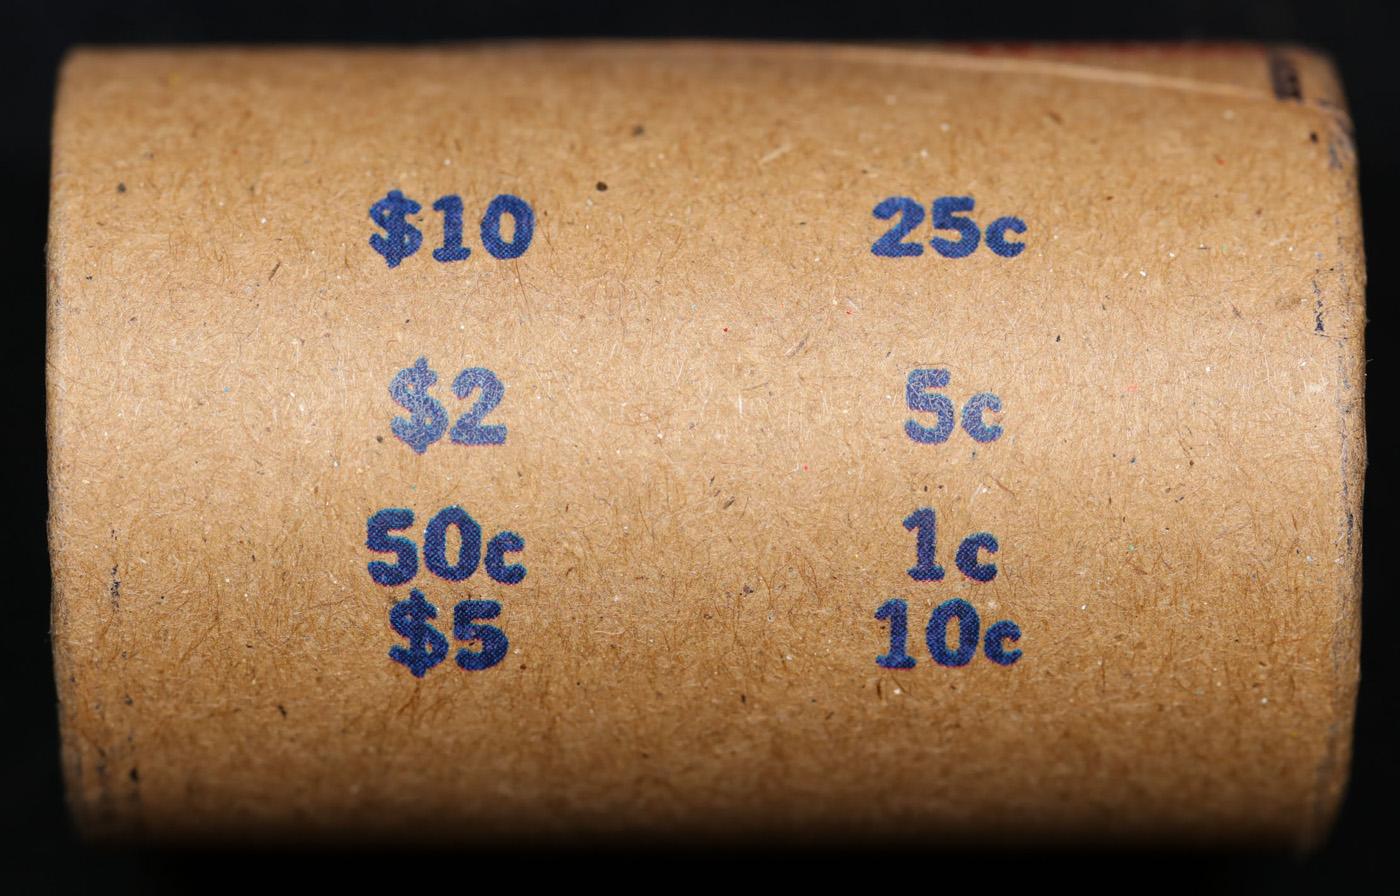 High Value! - Covered End Roll - Marked " Morgan Exceptional" - Weight shows x20 Coins (FC)